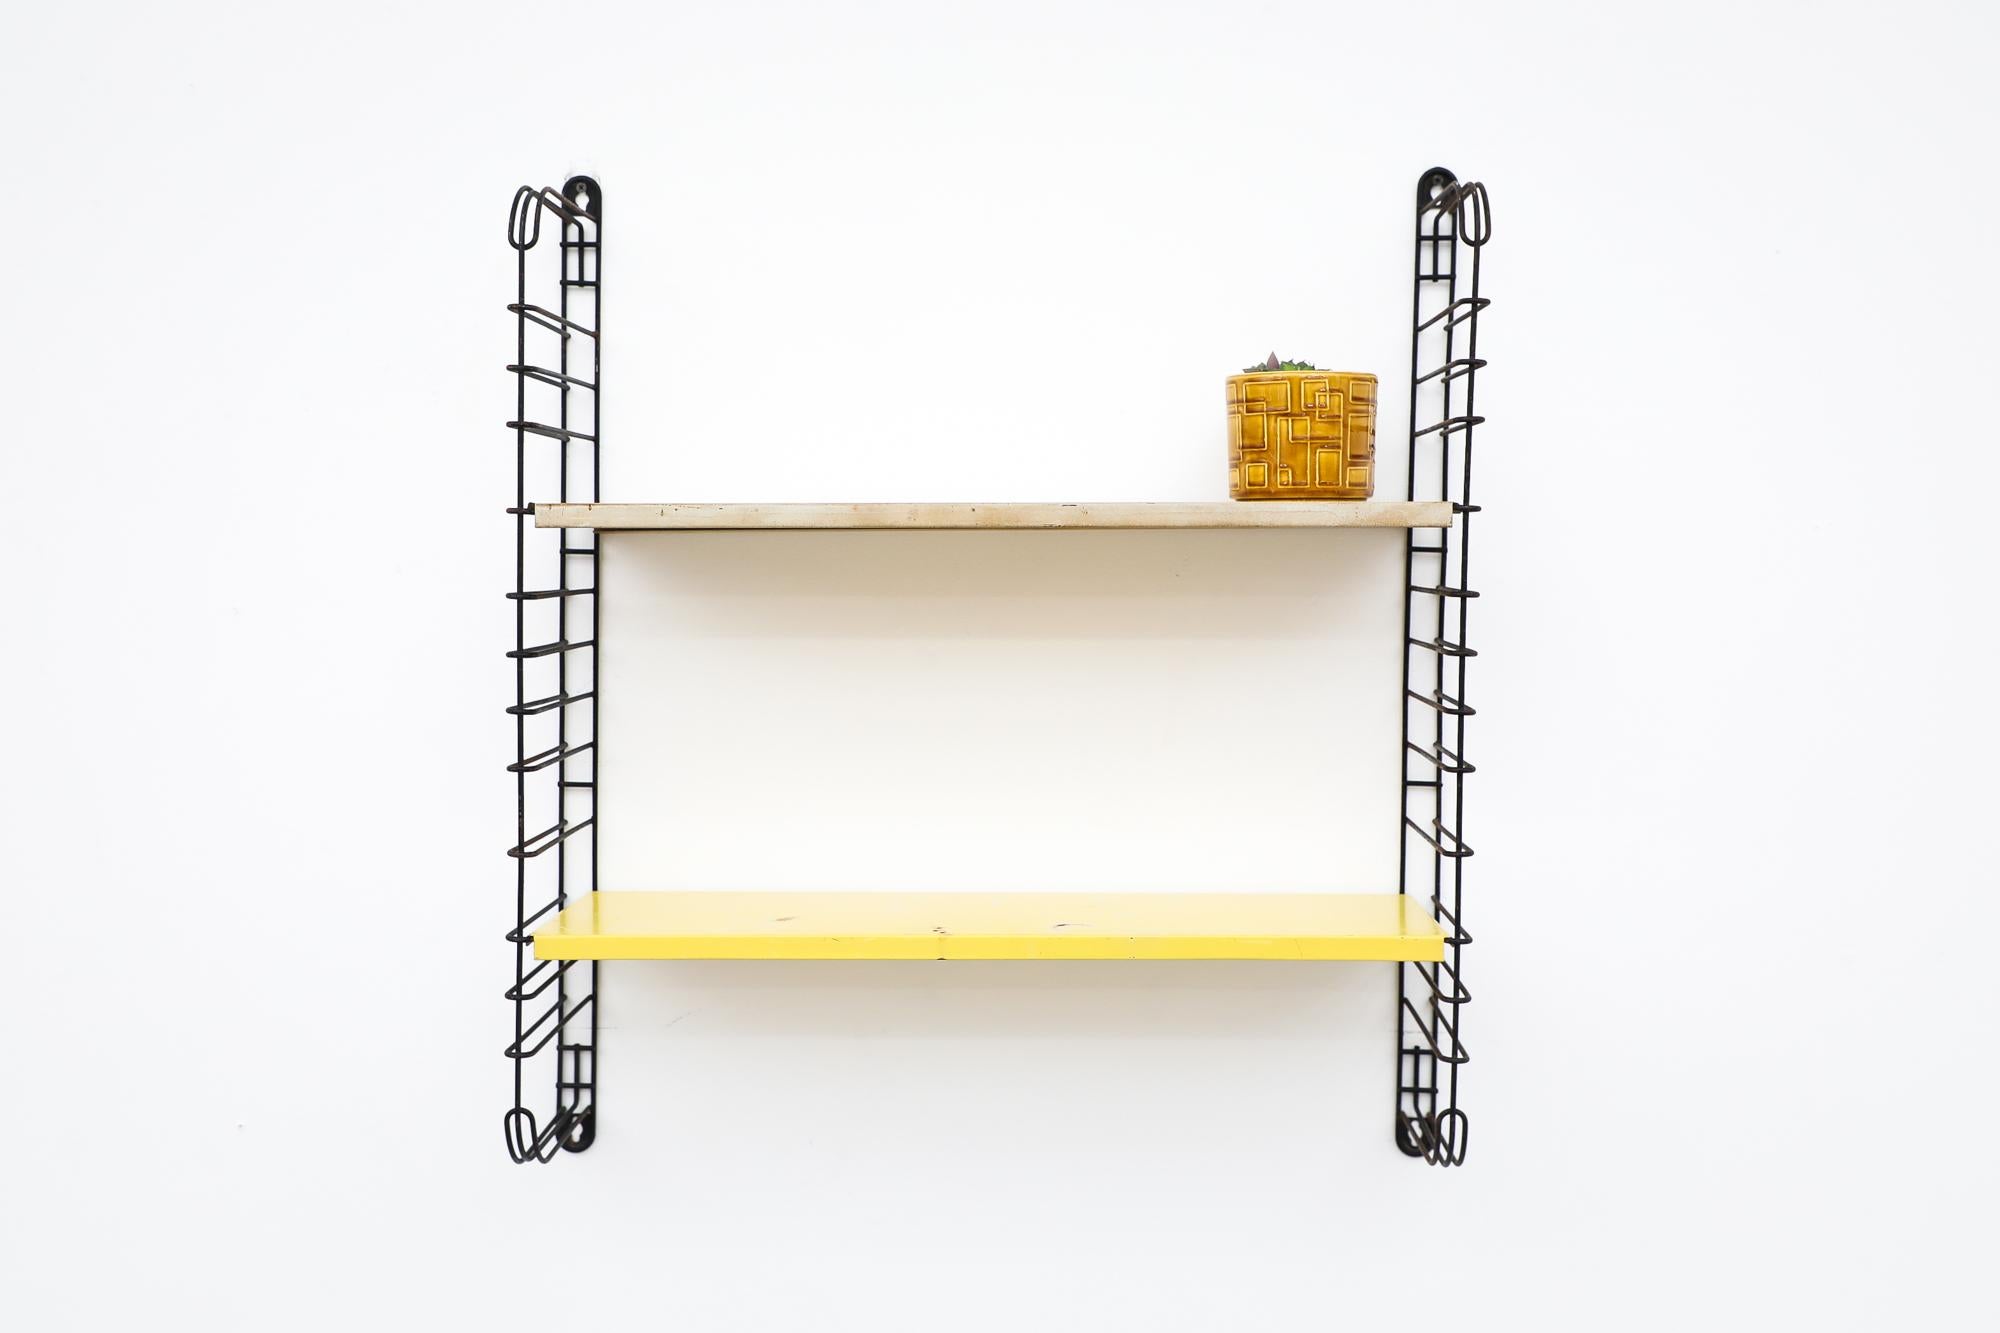 Midcentury TOMADO industrial shelving with very worn white and a sunshine yellow enameled metal shelves on black metal wire risers. Designed by Jan van der Togt. The shelves rest on the wire risers and can be arranged to different heights. In very